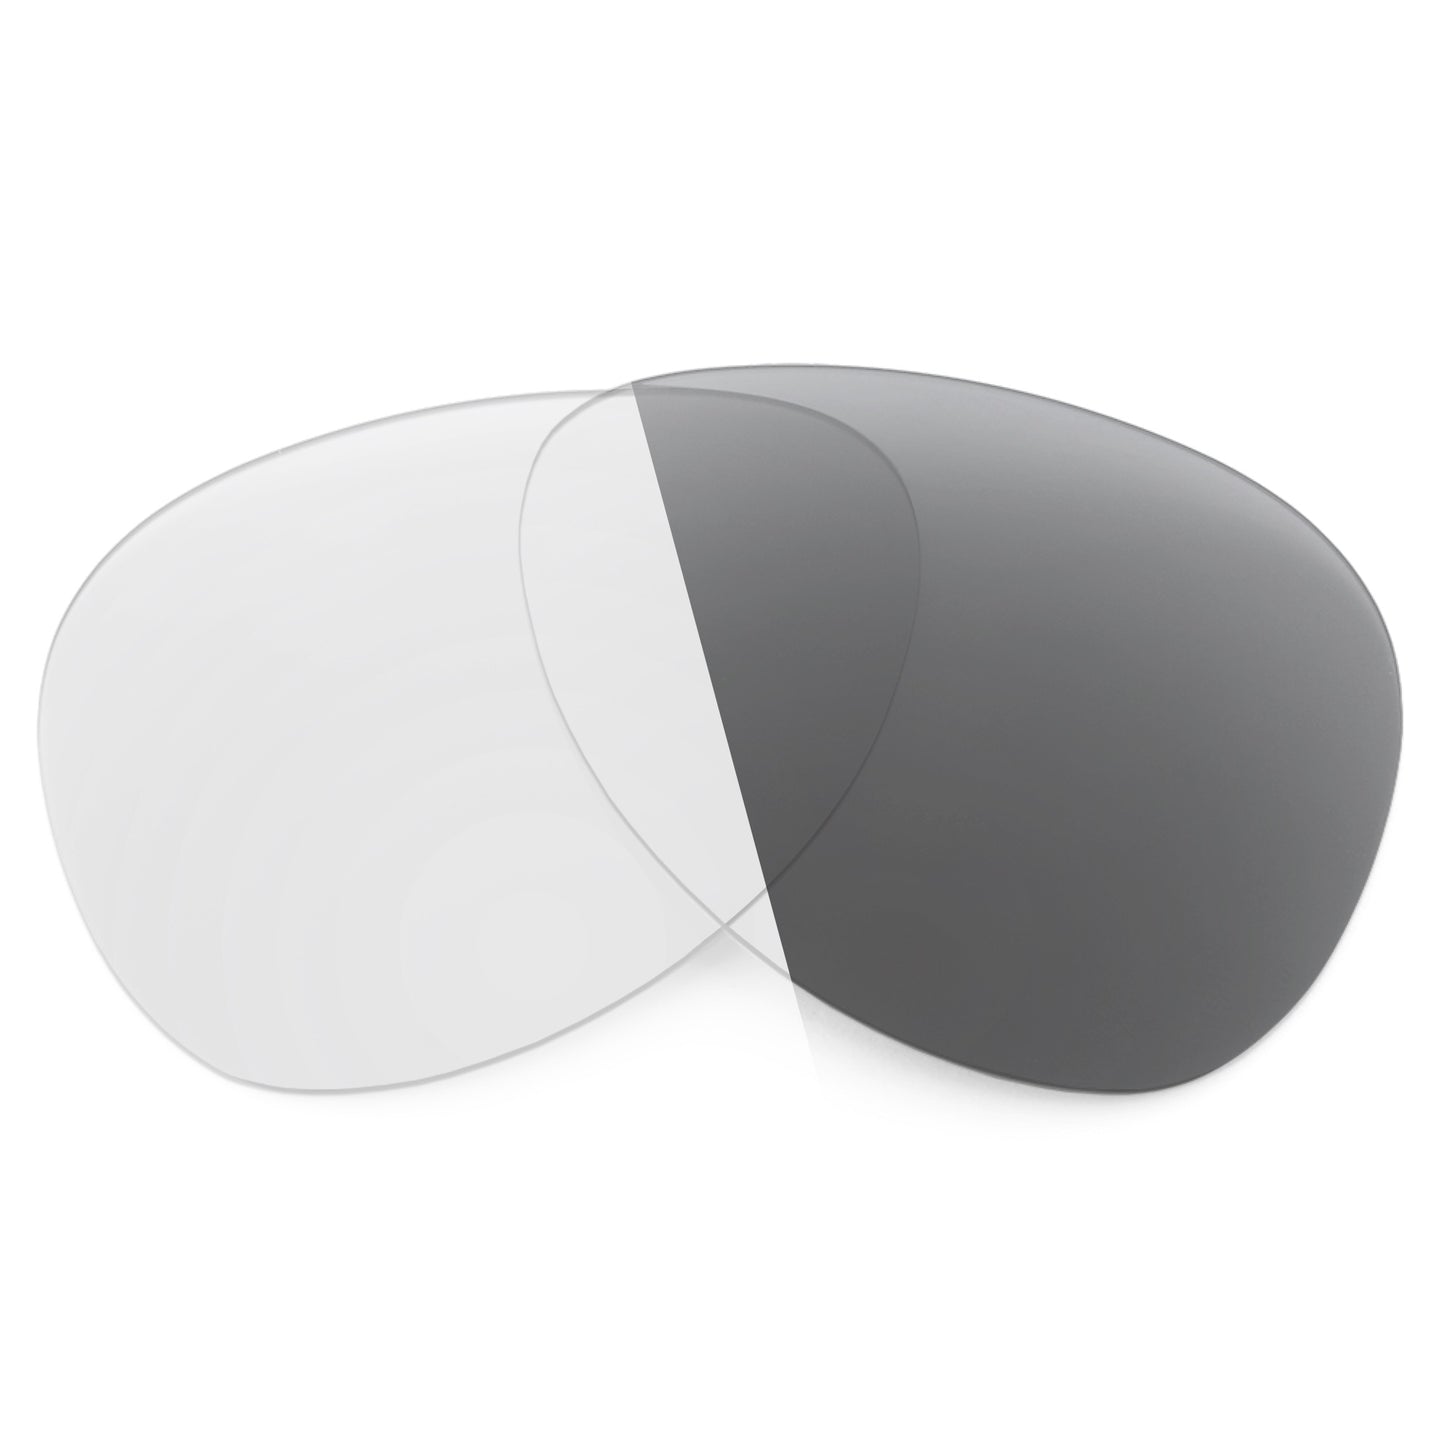 Revant replacement lenses for Ray-Ban RB3515 58mm Non-Polarized Adapt Gray Photochromic